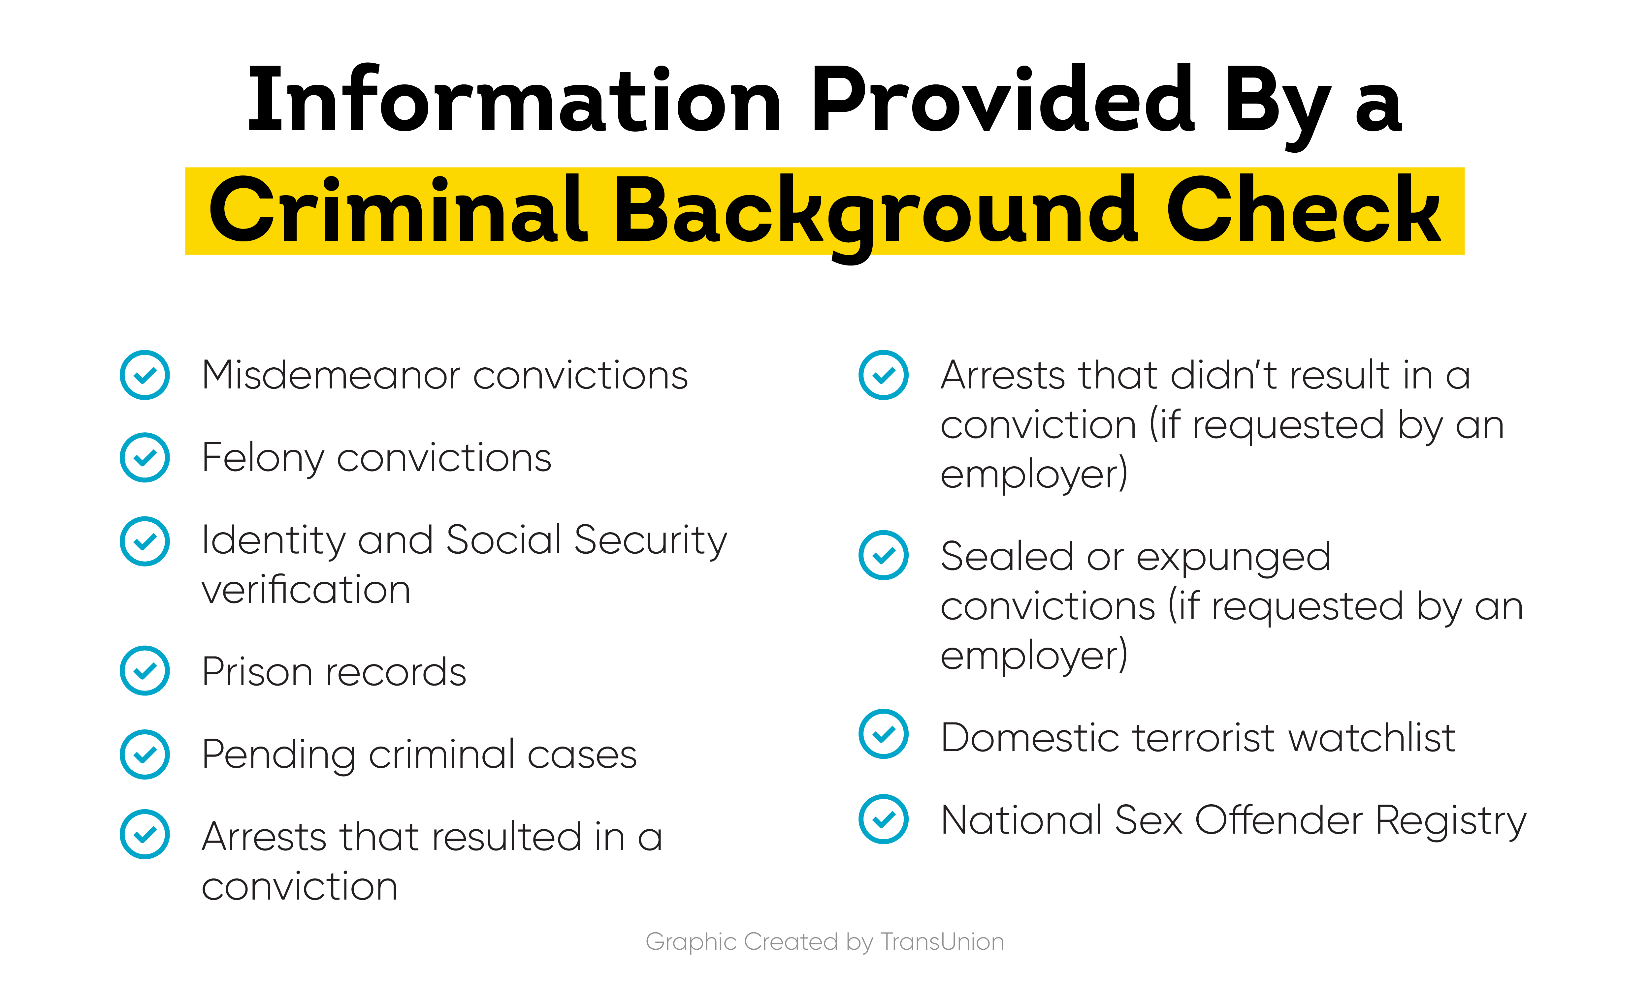 Information provided by a criminal background check